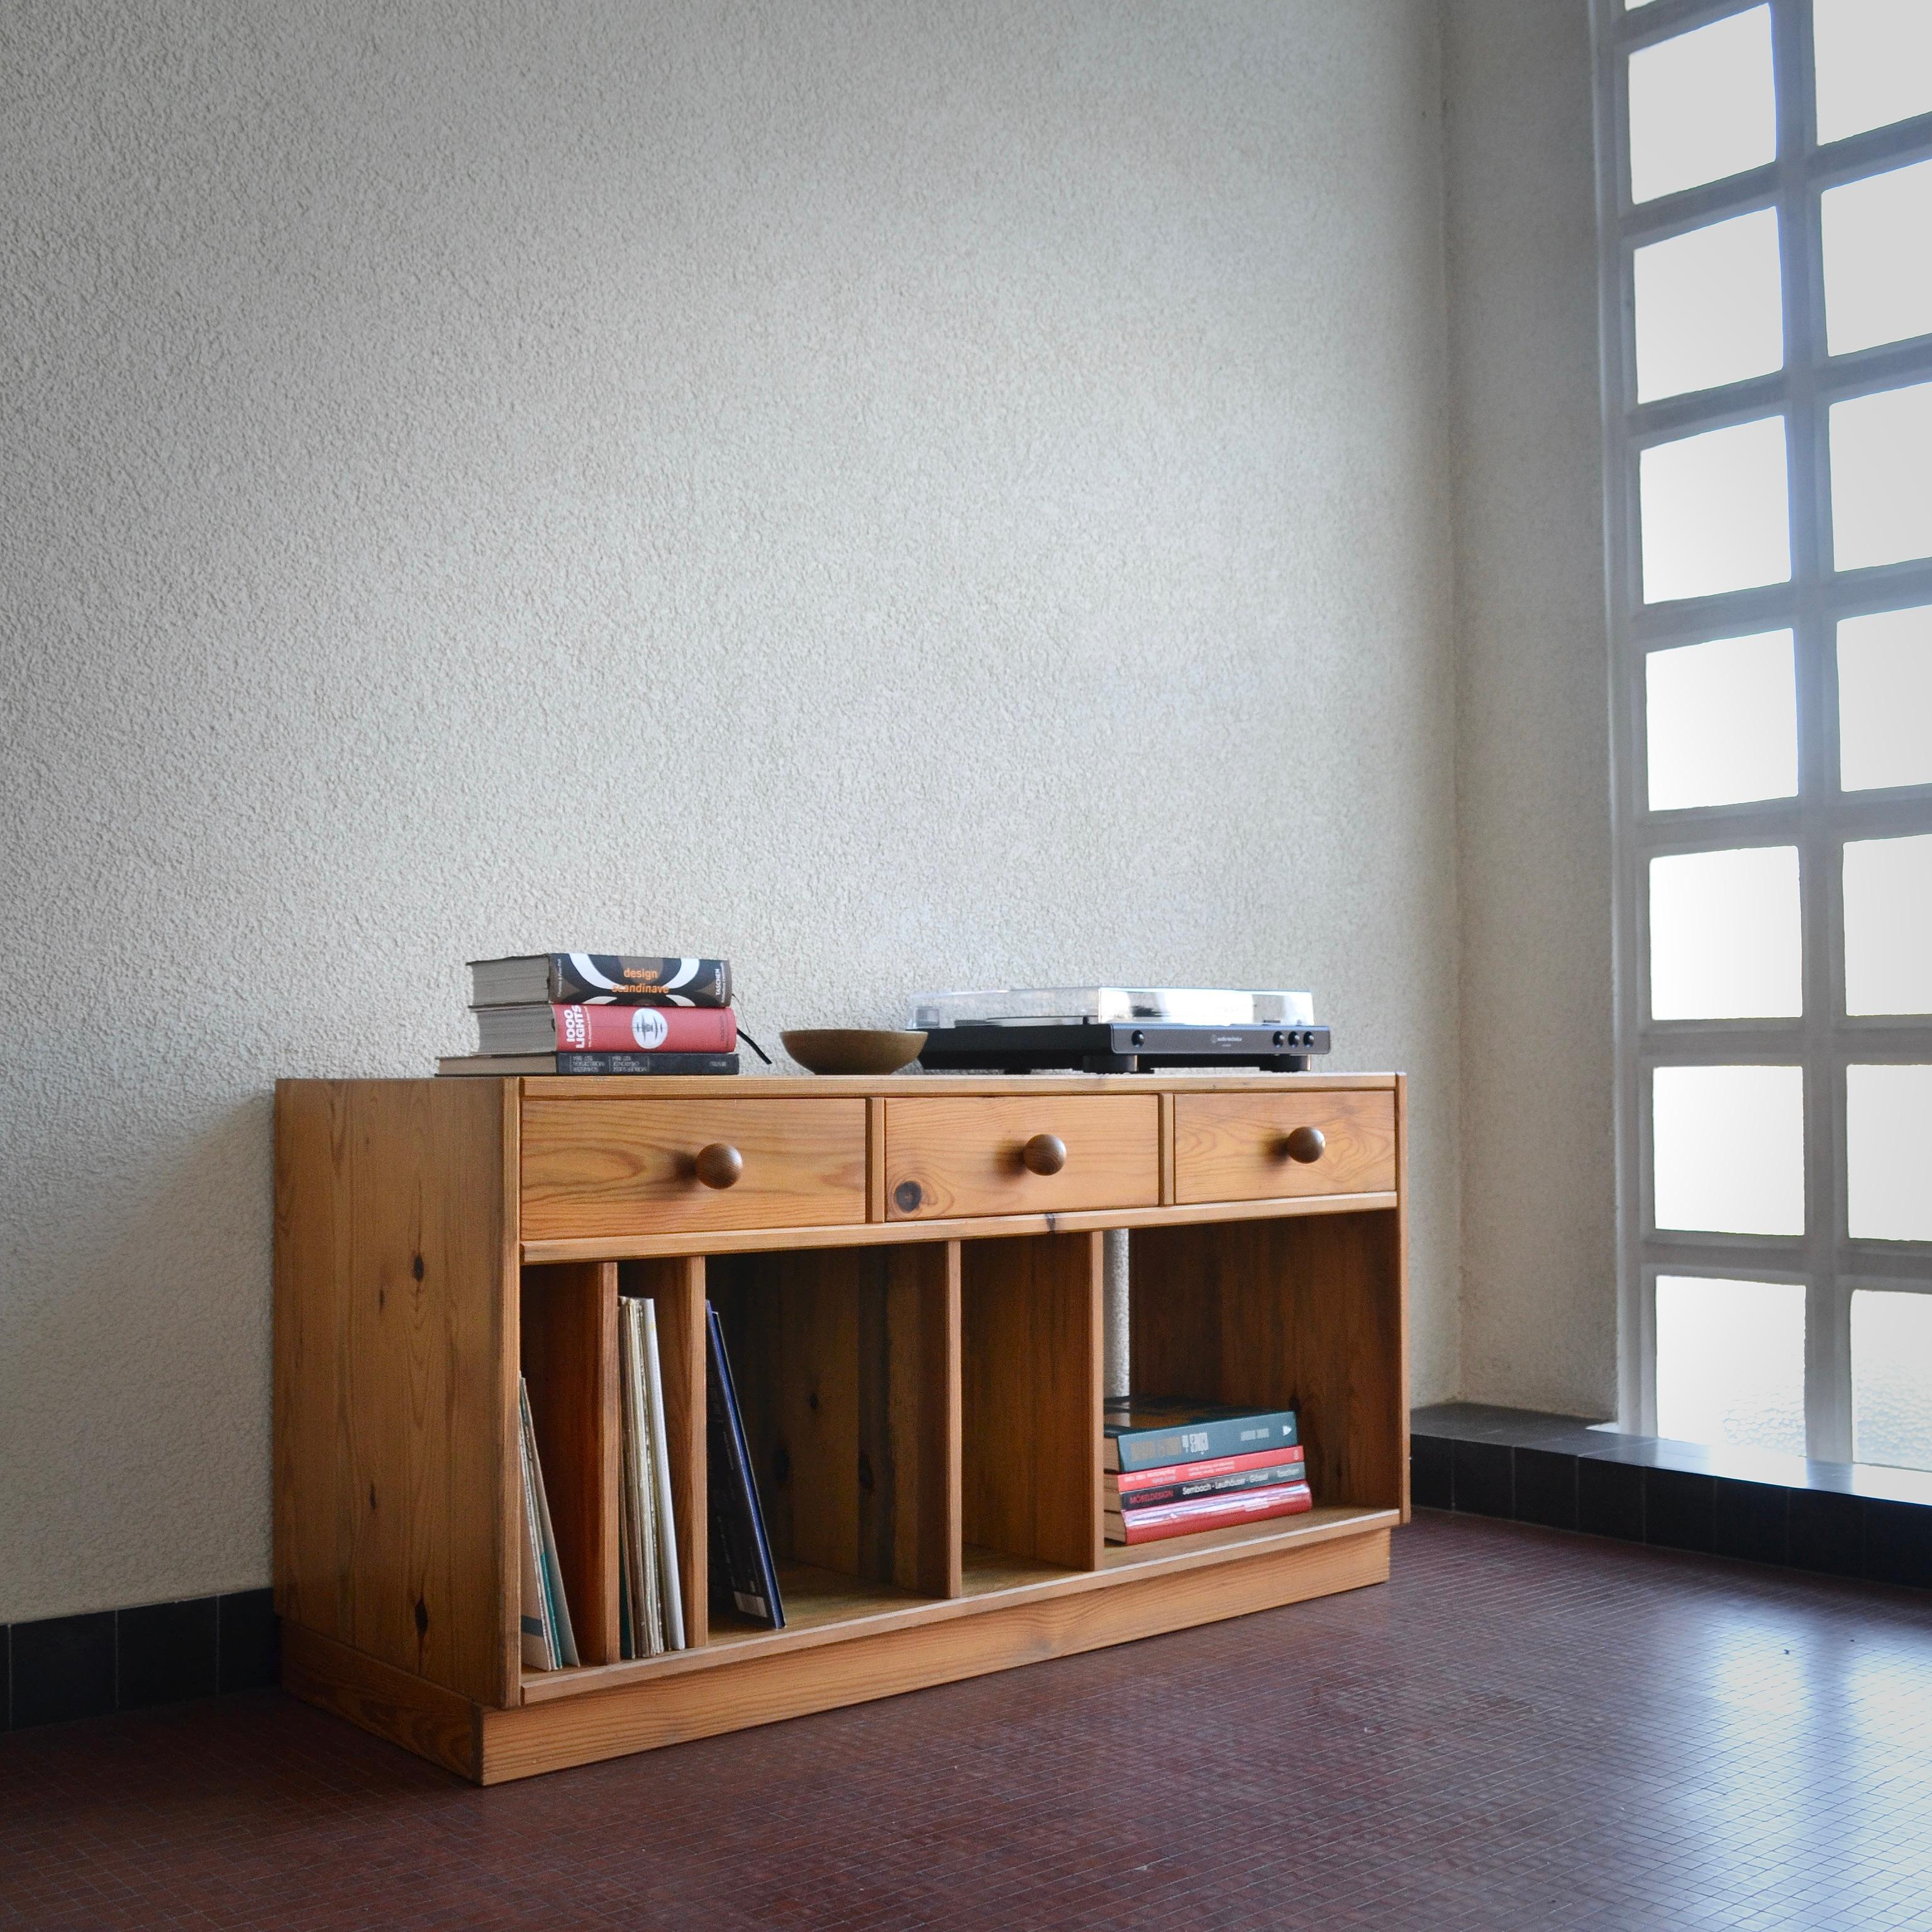 So strong!

Let's describe on the surface first, then we'll go into detail. This pretty sideboard made entirely of solid pine comes straight from Sweden. Made by Sven Larsson in the 70s, this vinyl cabinet can become the coolest place in the living